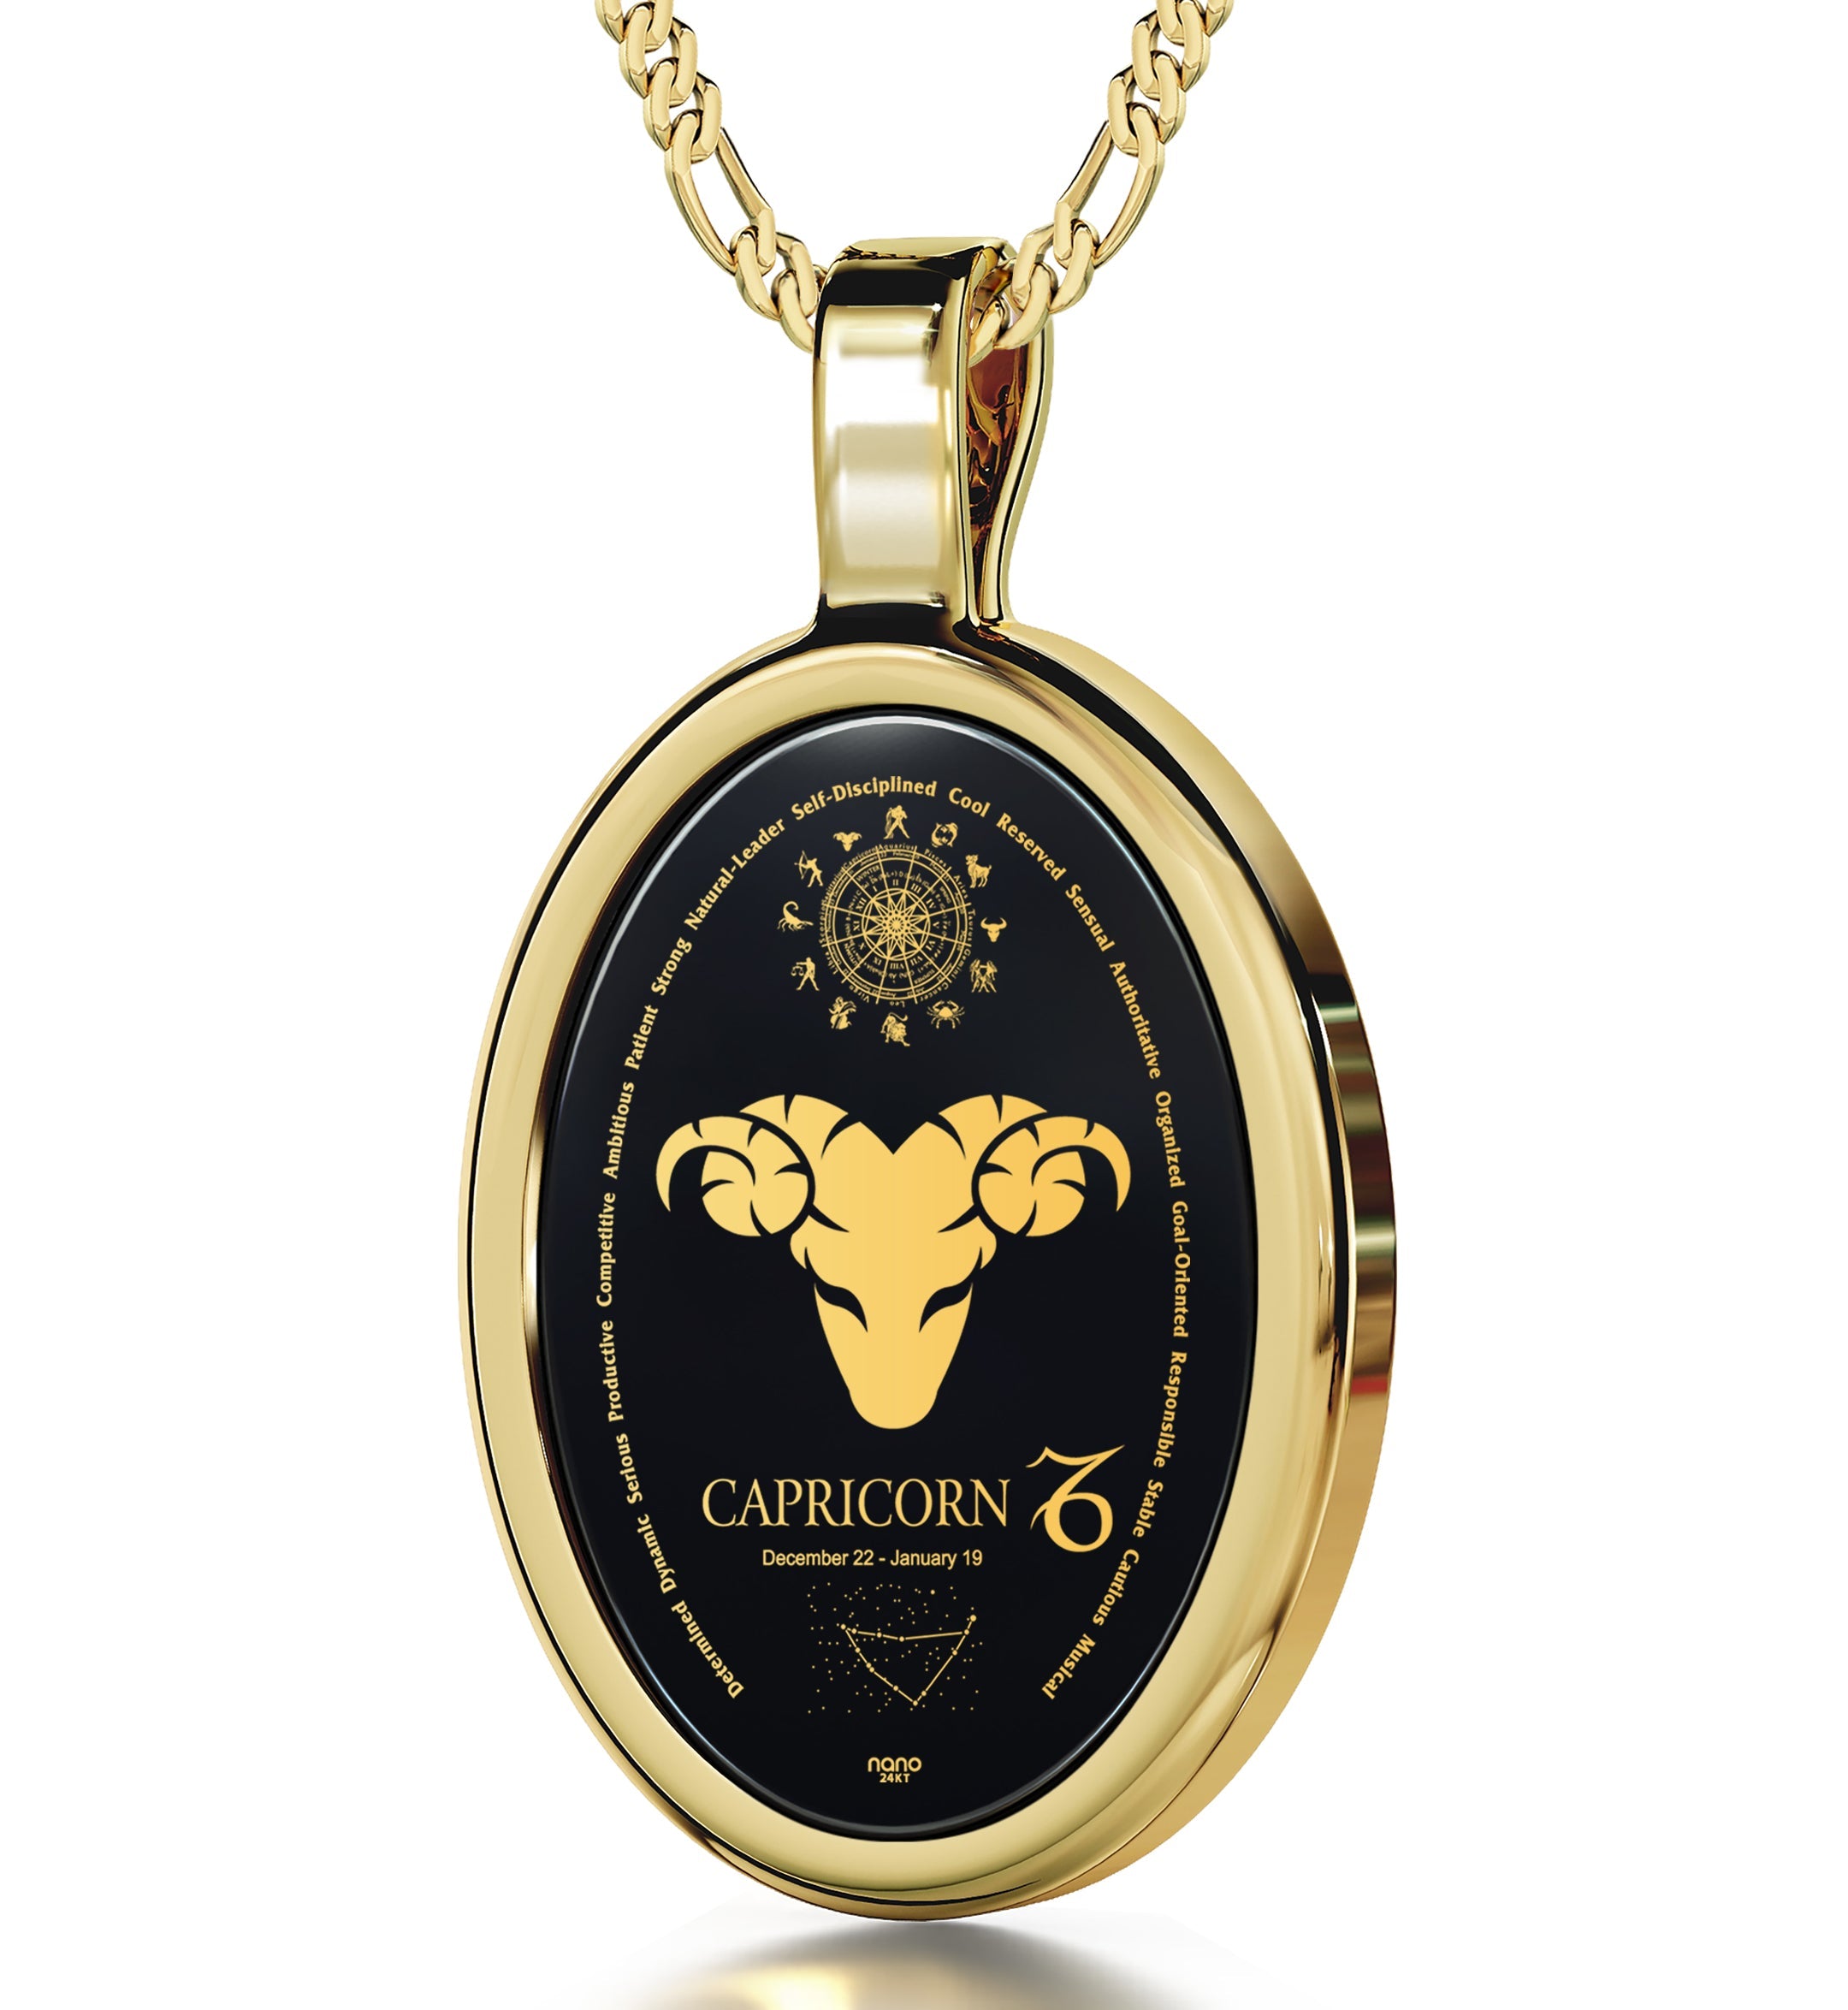 Round, gold and black Capricorn Necklace Zodiac Pendant 24k Gold Inscribed on Onyx Stone with date range and descriptive words around the perimeter.